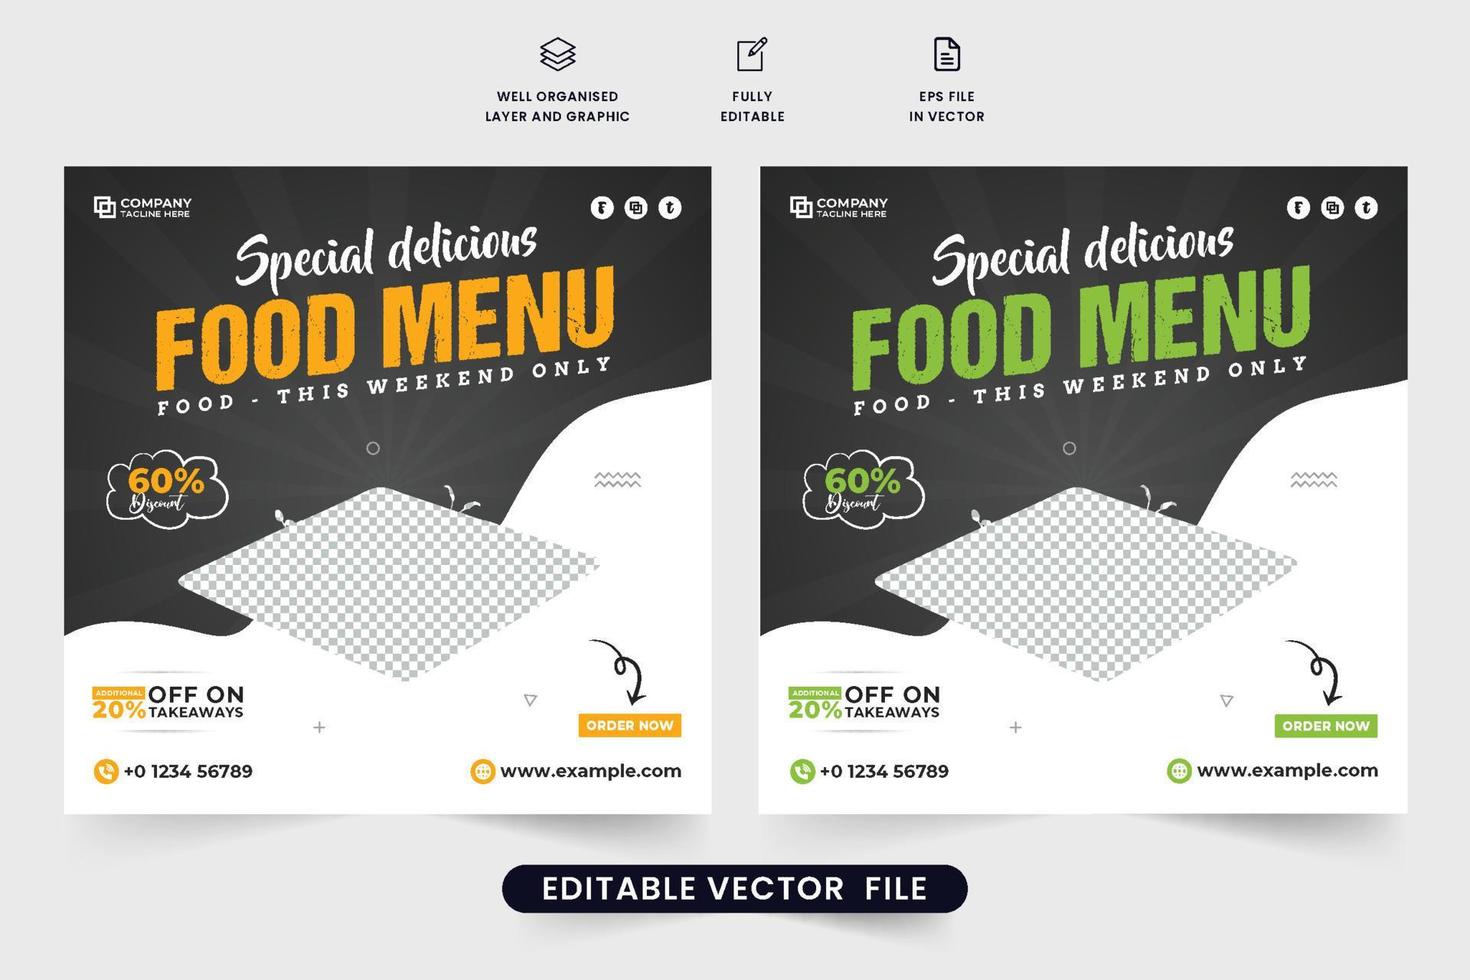 Special food menu design with dark backgrounds for digital marketing. Modern restaurant social media post vectors with abstract shapes. Delicious food advertisement poster design for restaurants.